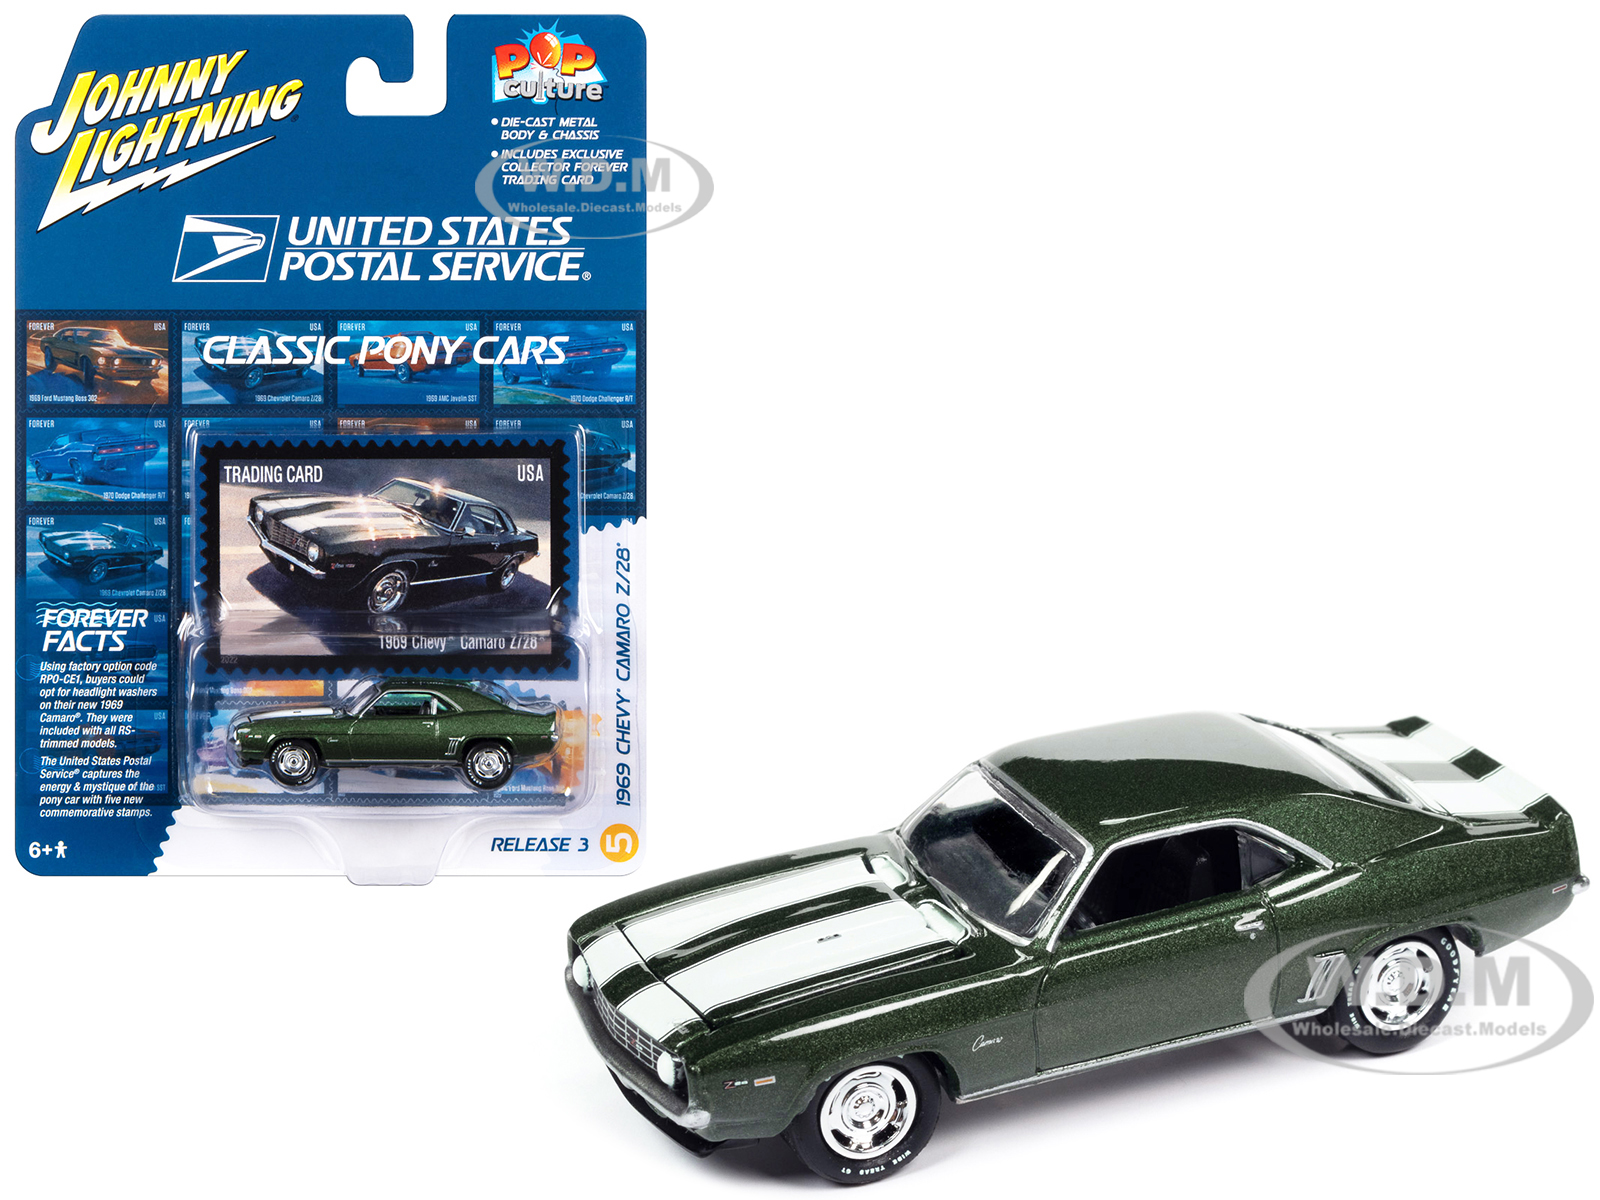 1969 Chevrolet Camaro Z/28 Green Metallic with White Stripes "United States Postal Service" "Pop Culture" 2023 Release 3  1/64 Diecast Model Car by J